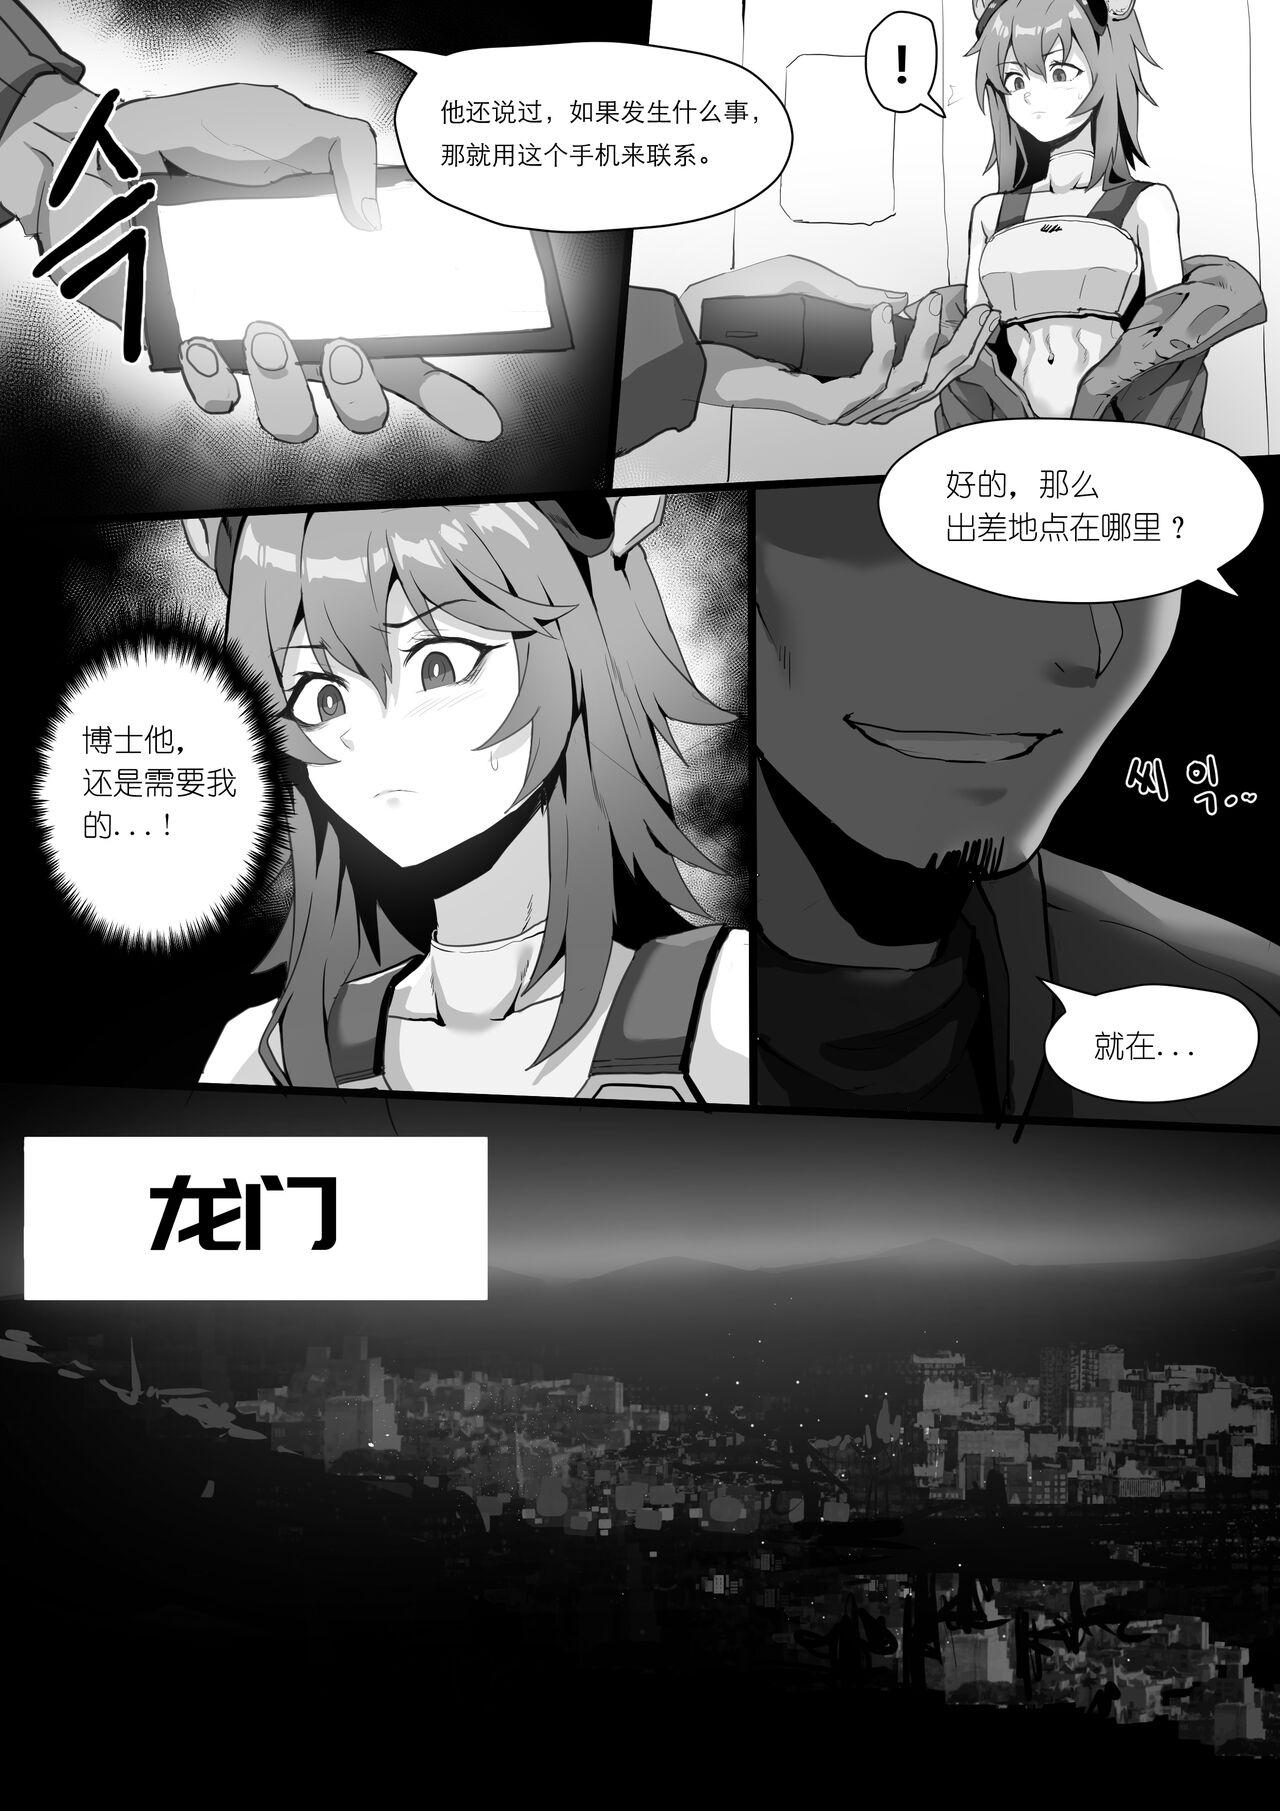 Blowing 欲望方舟记录3 - Arknights Blows - Page 7